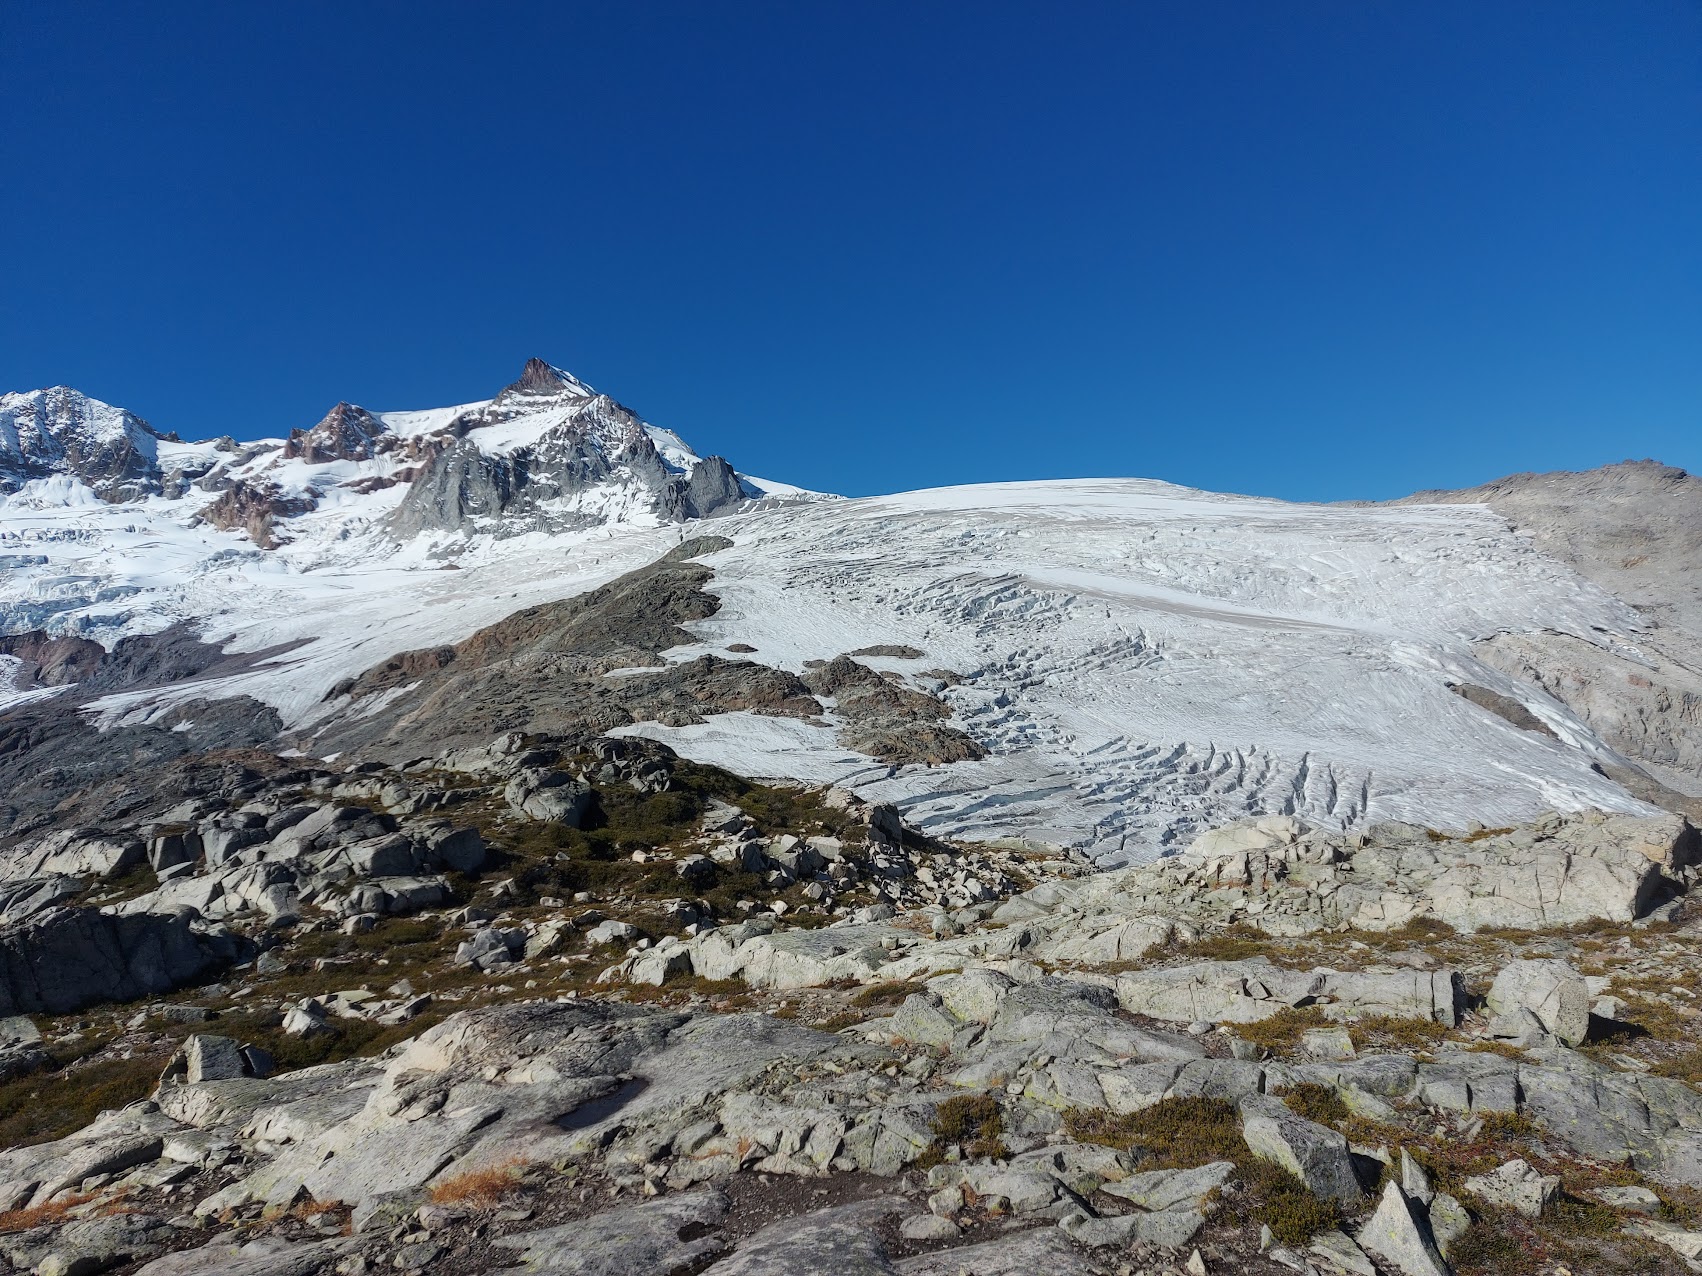 Mt Garibaldi surrounded by mostly glaciated terrain